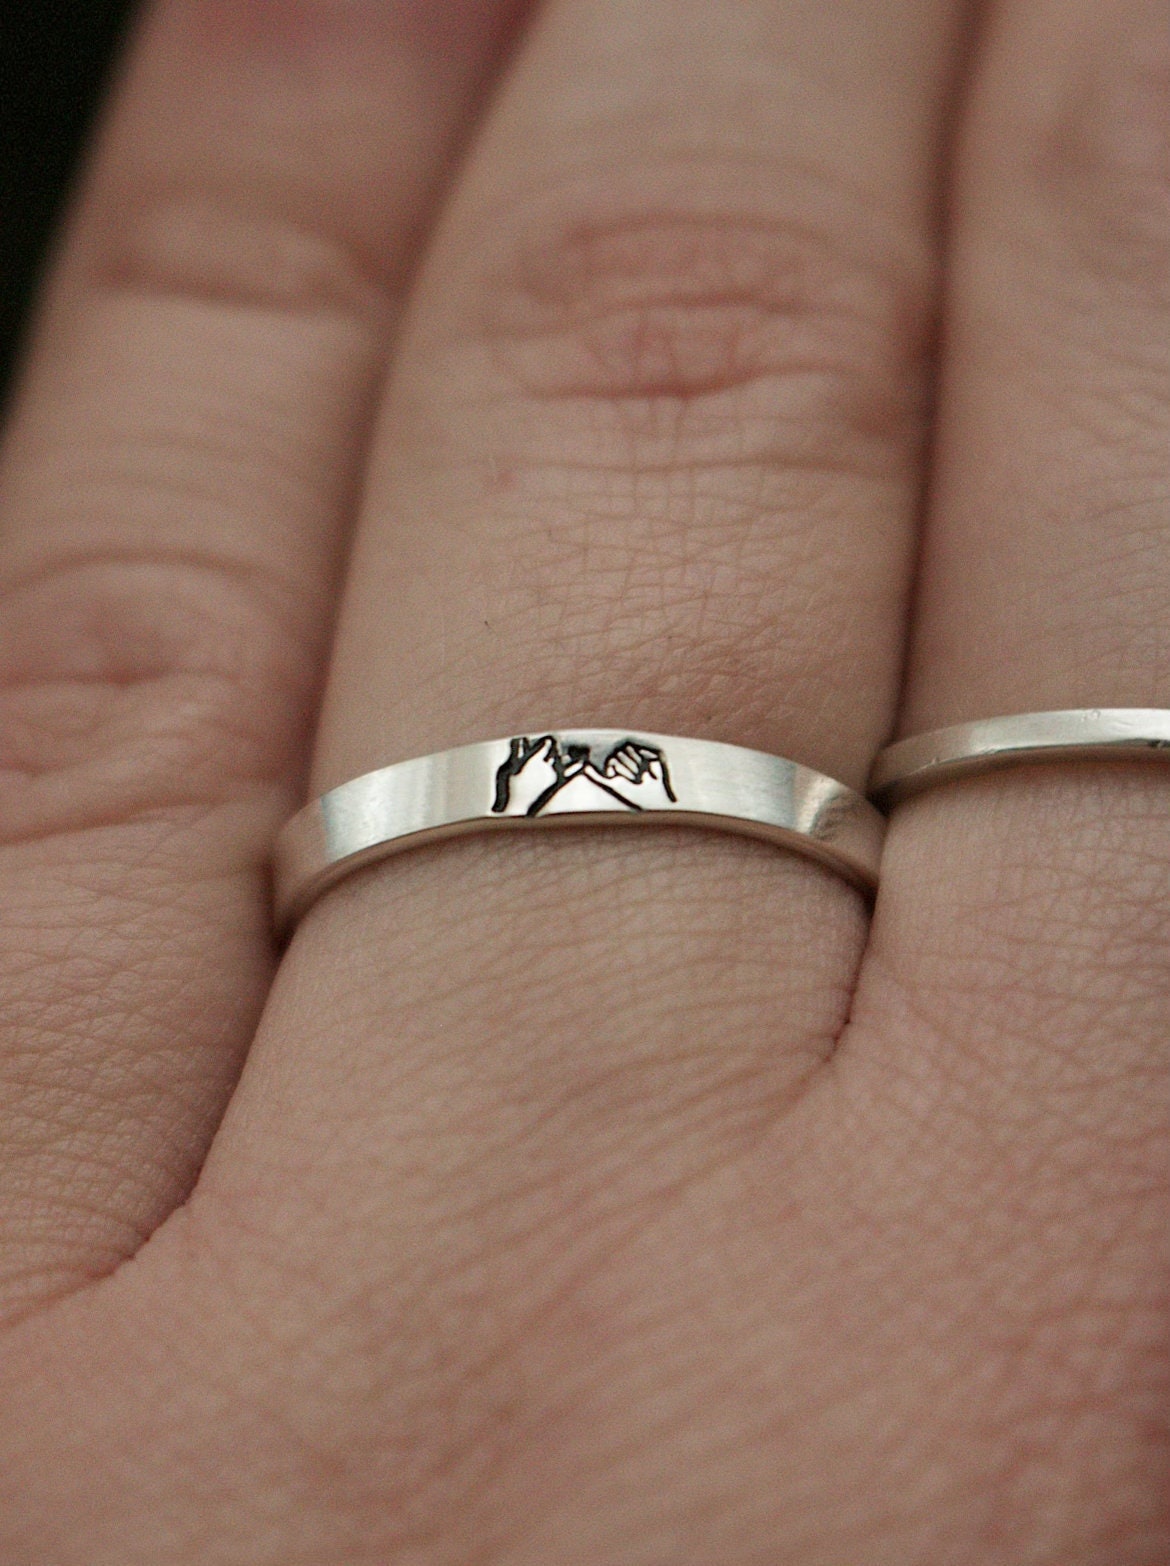 Tiny Pinky Swear Minimalist Stacking Ring | Pinky Promise Ring | Best Friend Birthday Gifts | Dainty Silver Ring | Couples Promise Ring